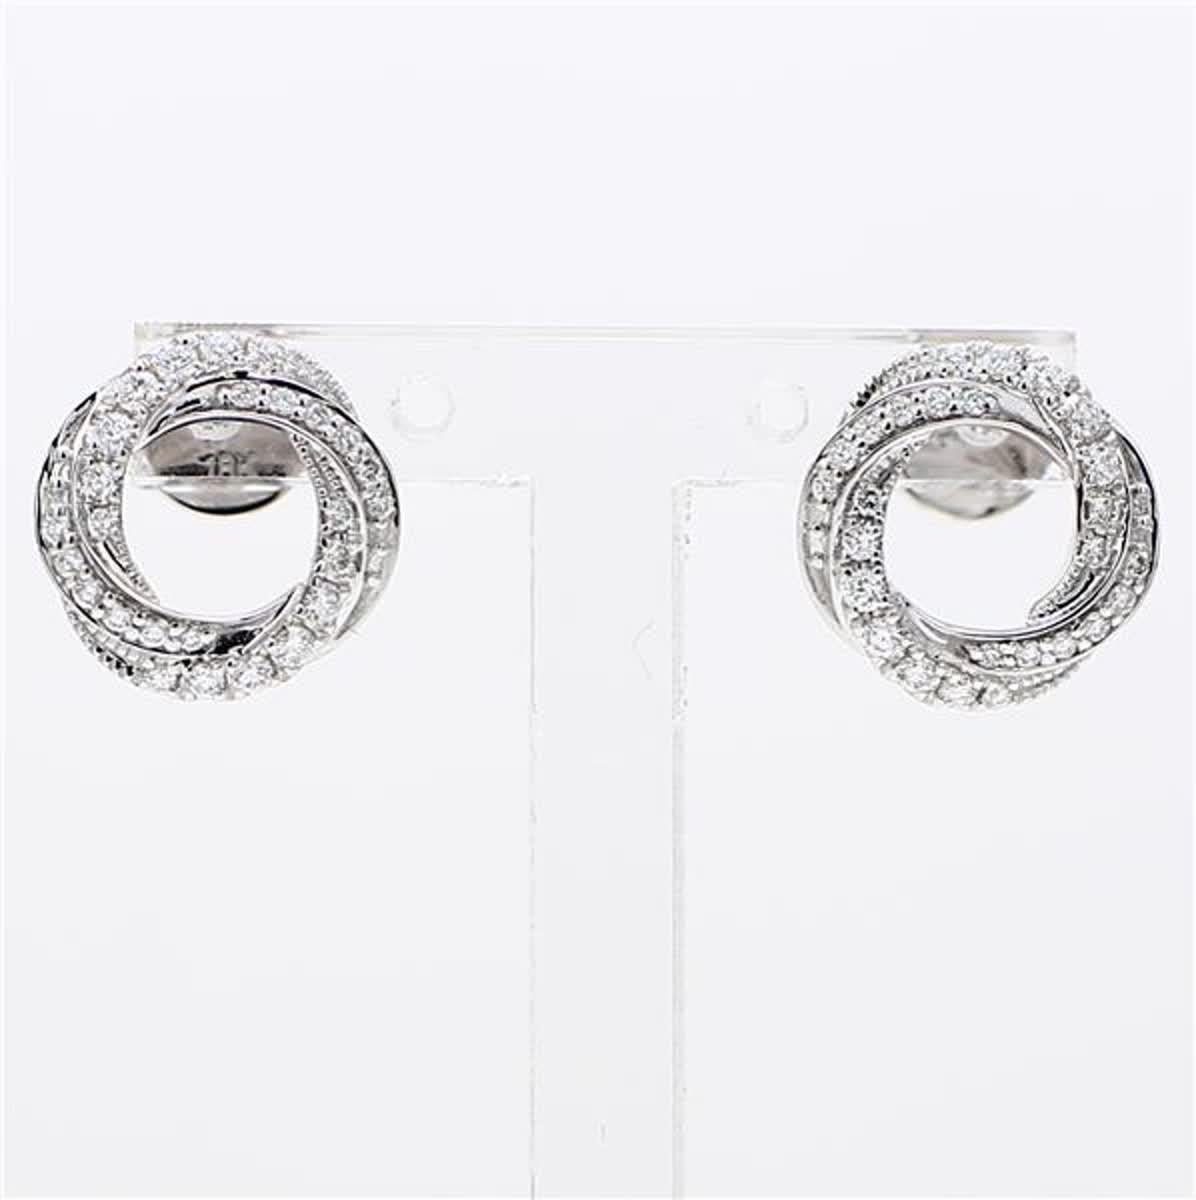 RareGemWorld's classic diamond earrings. Mounted in a beautiful 18K White Gold setting with natural round cut white diamond melee. These earrings are guaranteed to impress and enhance your personal collection!

Total Weight: .33cts

Diamond